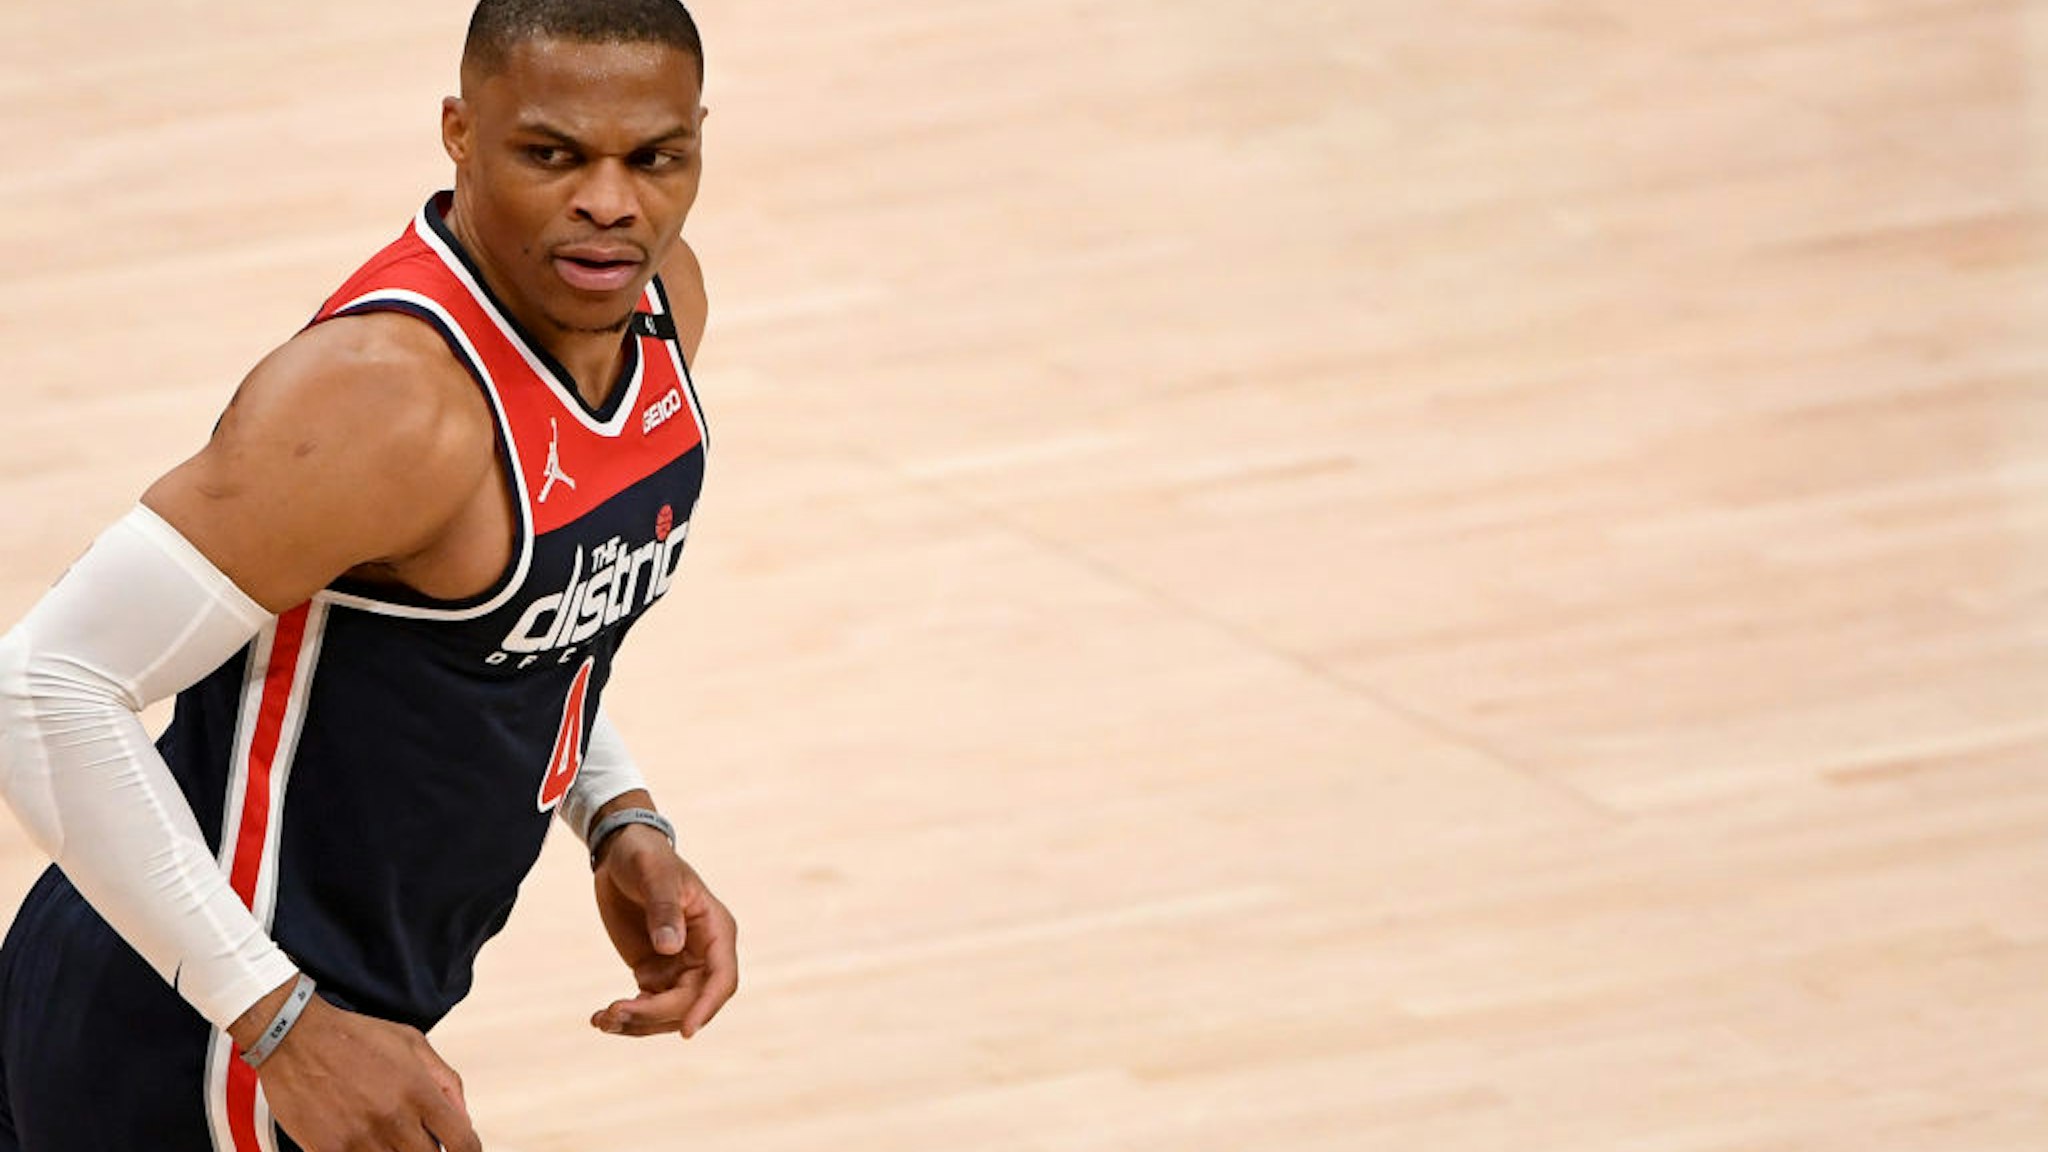 WASHINGTON, DC - MAY 03: Russell Westbrook #4 of the Washington Wizards reacts after a play against the Indiana Pacers during the first half at Capital One Arena on May 03, 2021 in Washington, DC. NOTE TO USER: User expressly acknowledges and agrees that, by downloading and or using this photograph, User is consenting to the terms and conditions of the Getty Images License Agreement. (Photo by Will Newton/Getty Images)